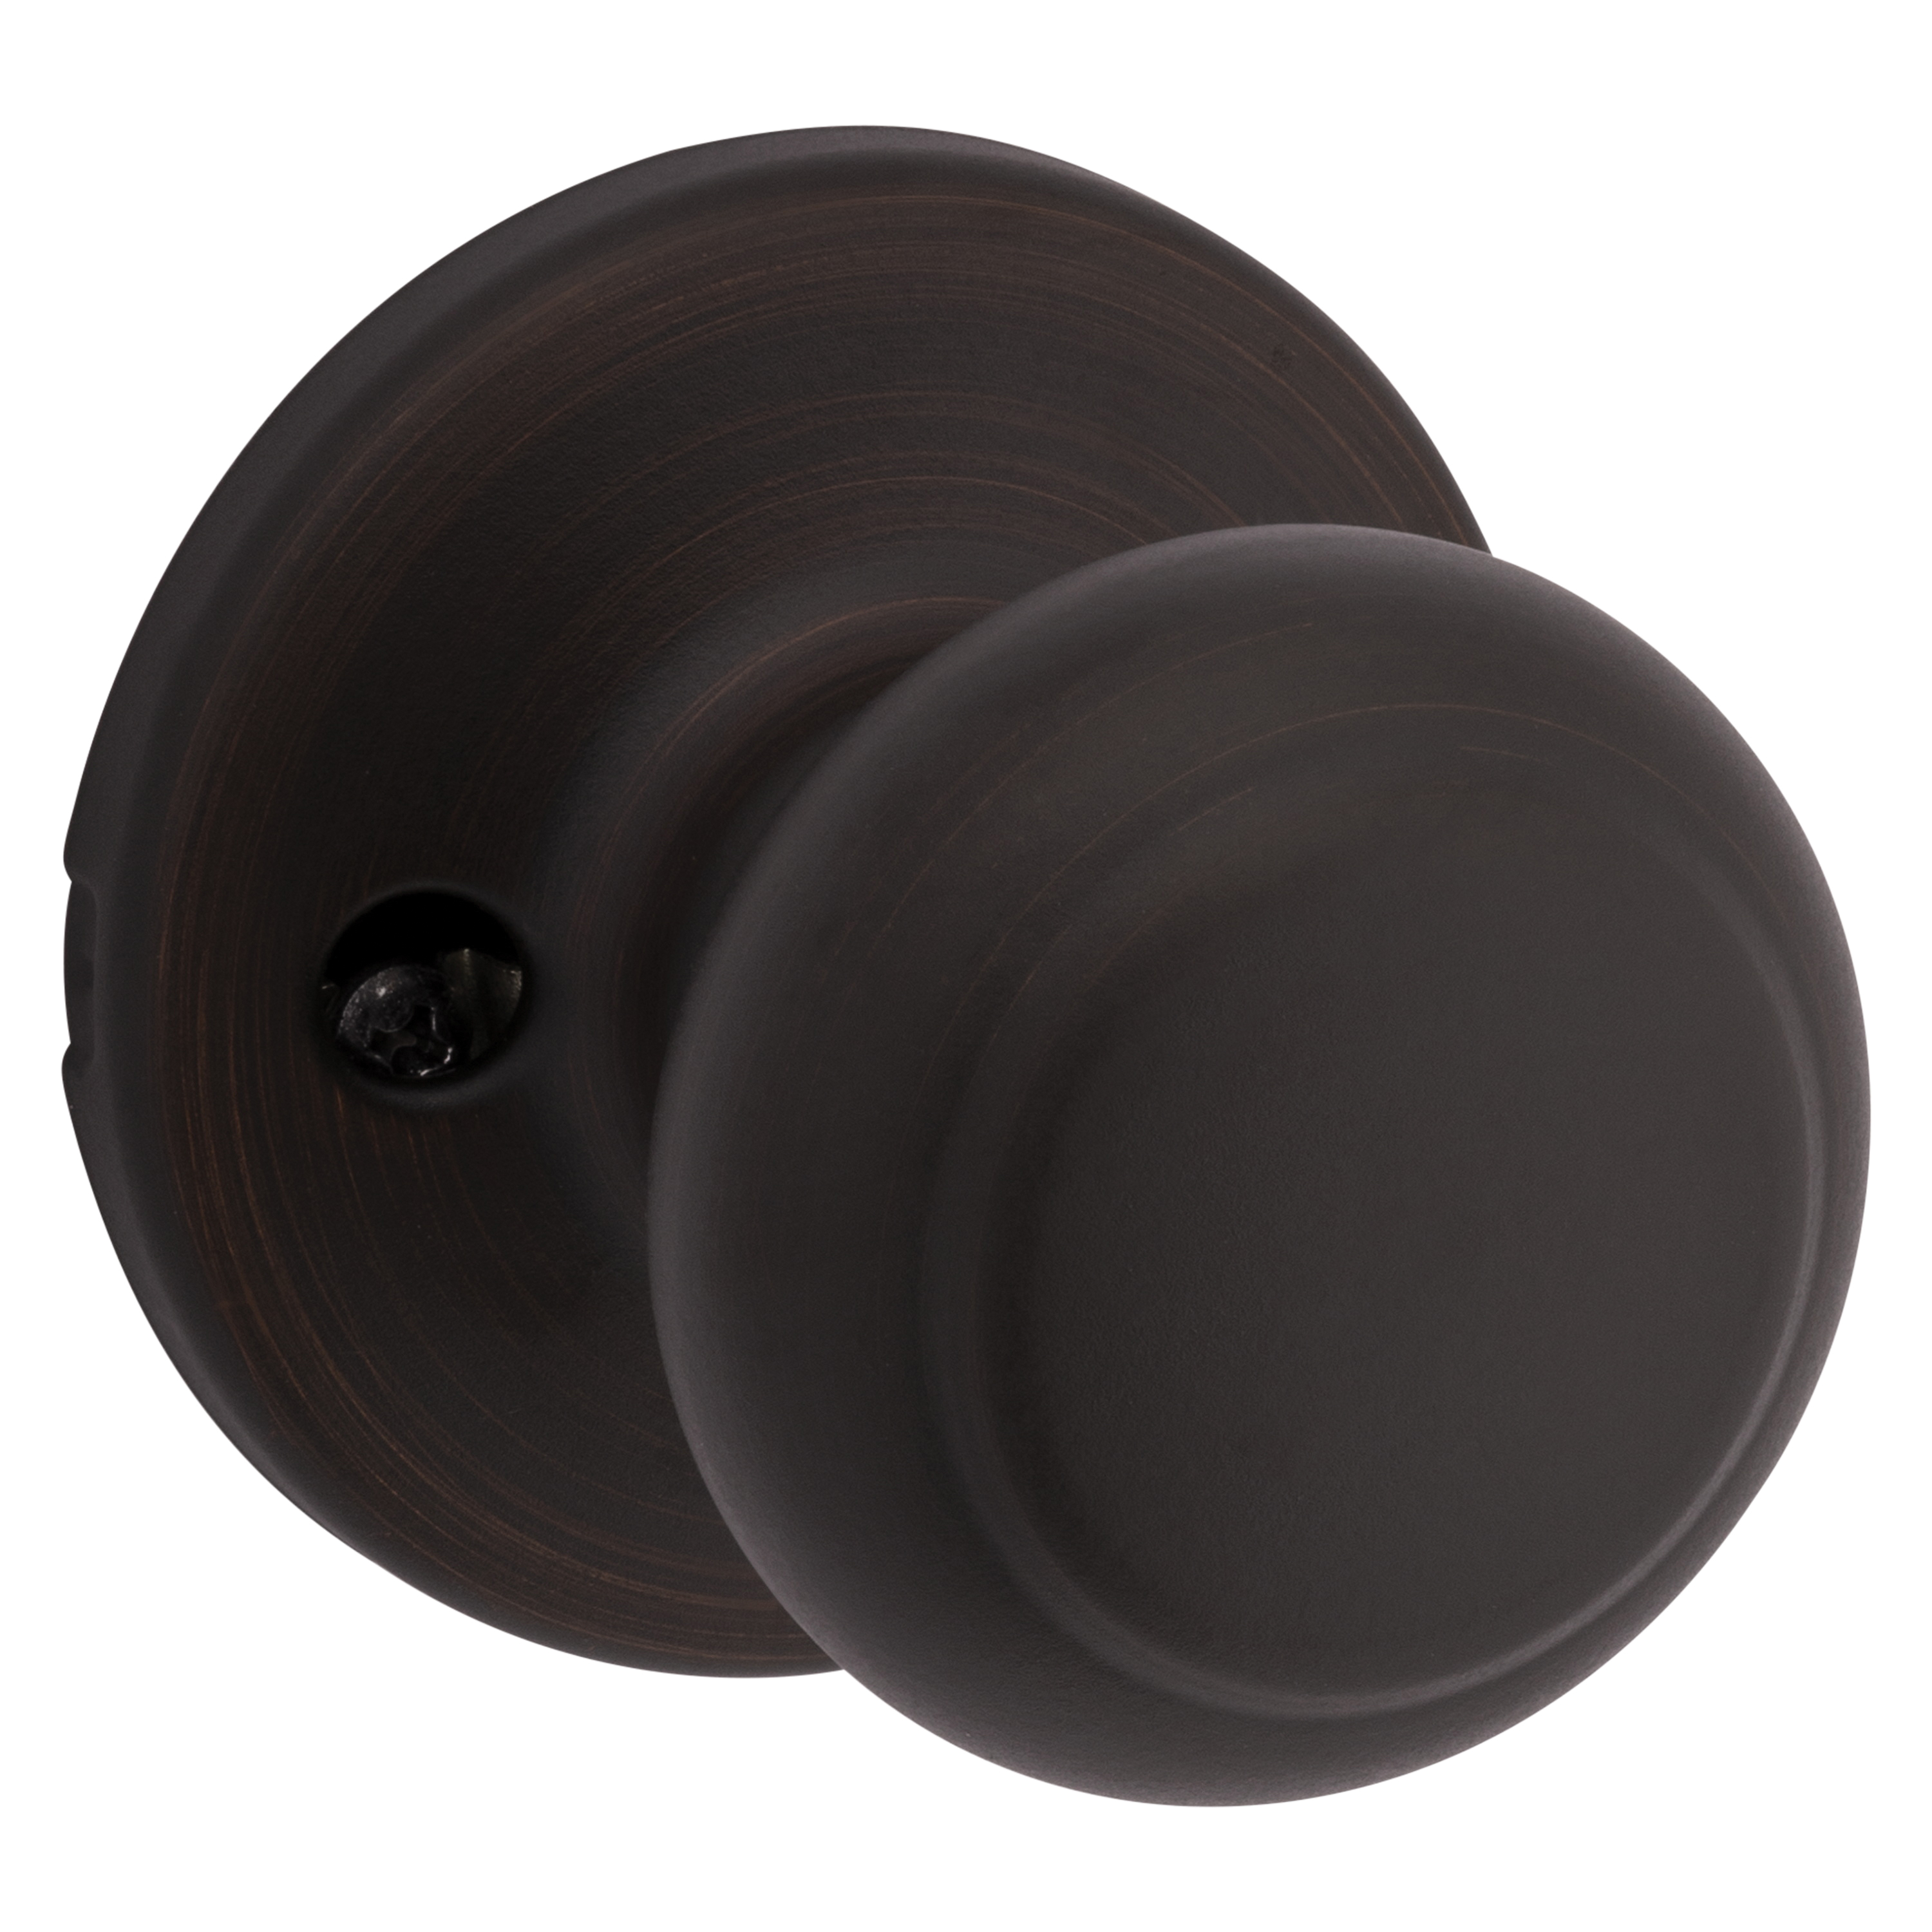 488CV 11P Dummy Knob, Cove Design, Venetian Bronze, For: Both Right Handed and Left Handed Doors